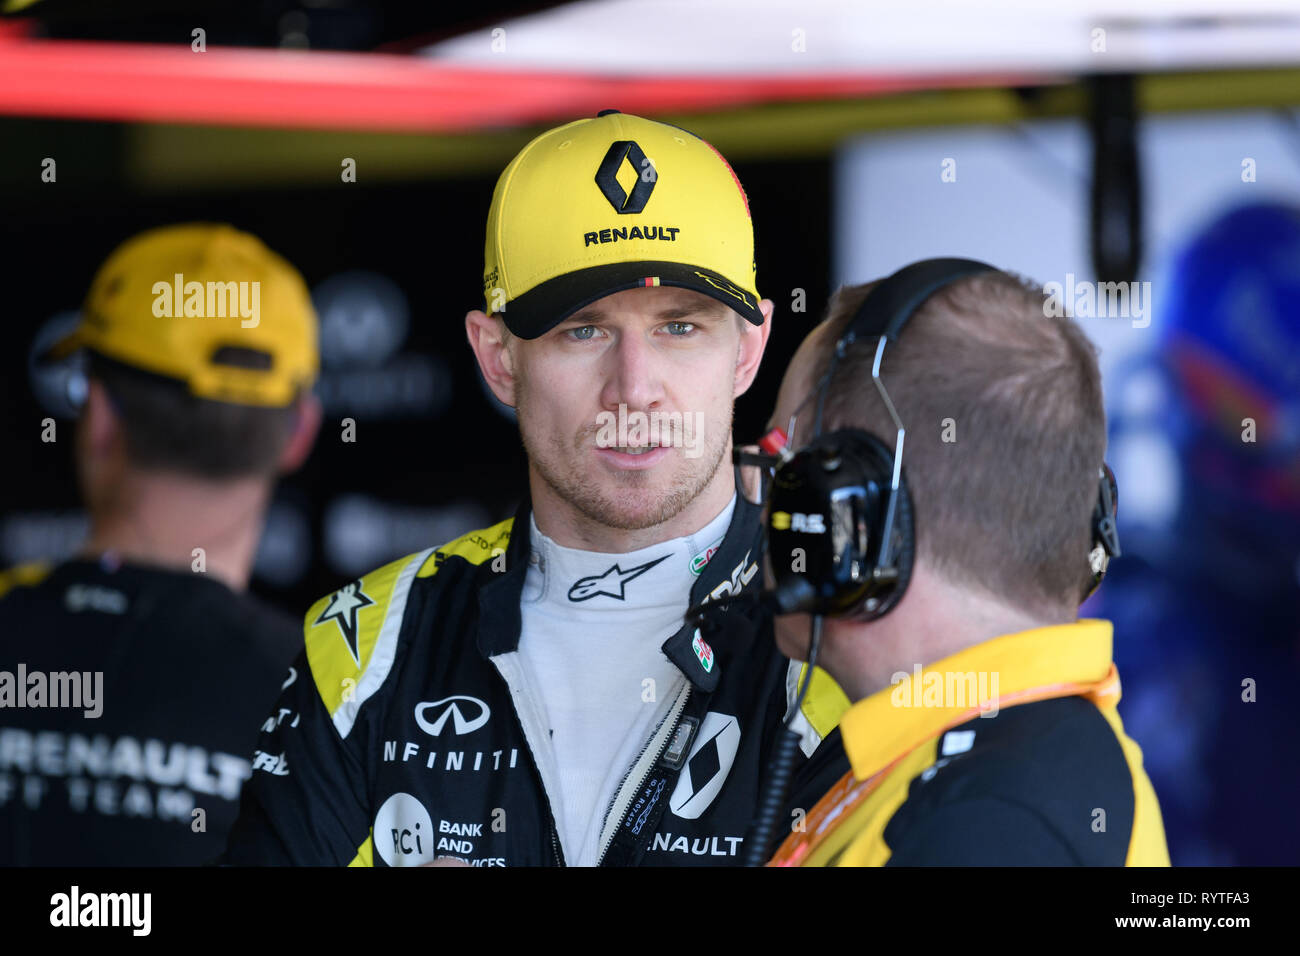 Albert Park, Melbourne, Australia. 15th Mar, 2019. Nico Hulkenberg (DEU) #27 from the Renault F1 Team in the garage during practice session two at the 2019 Australian Formula One Grand Prix at Albert Park, Melbourne, Australia. Sydney Low/Cal Sport Media/Alamy Live News Stock Photo